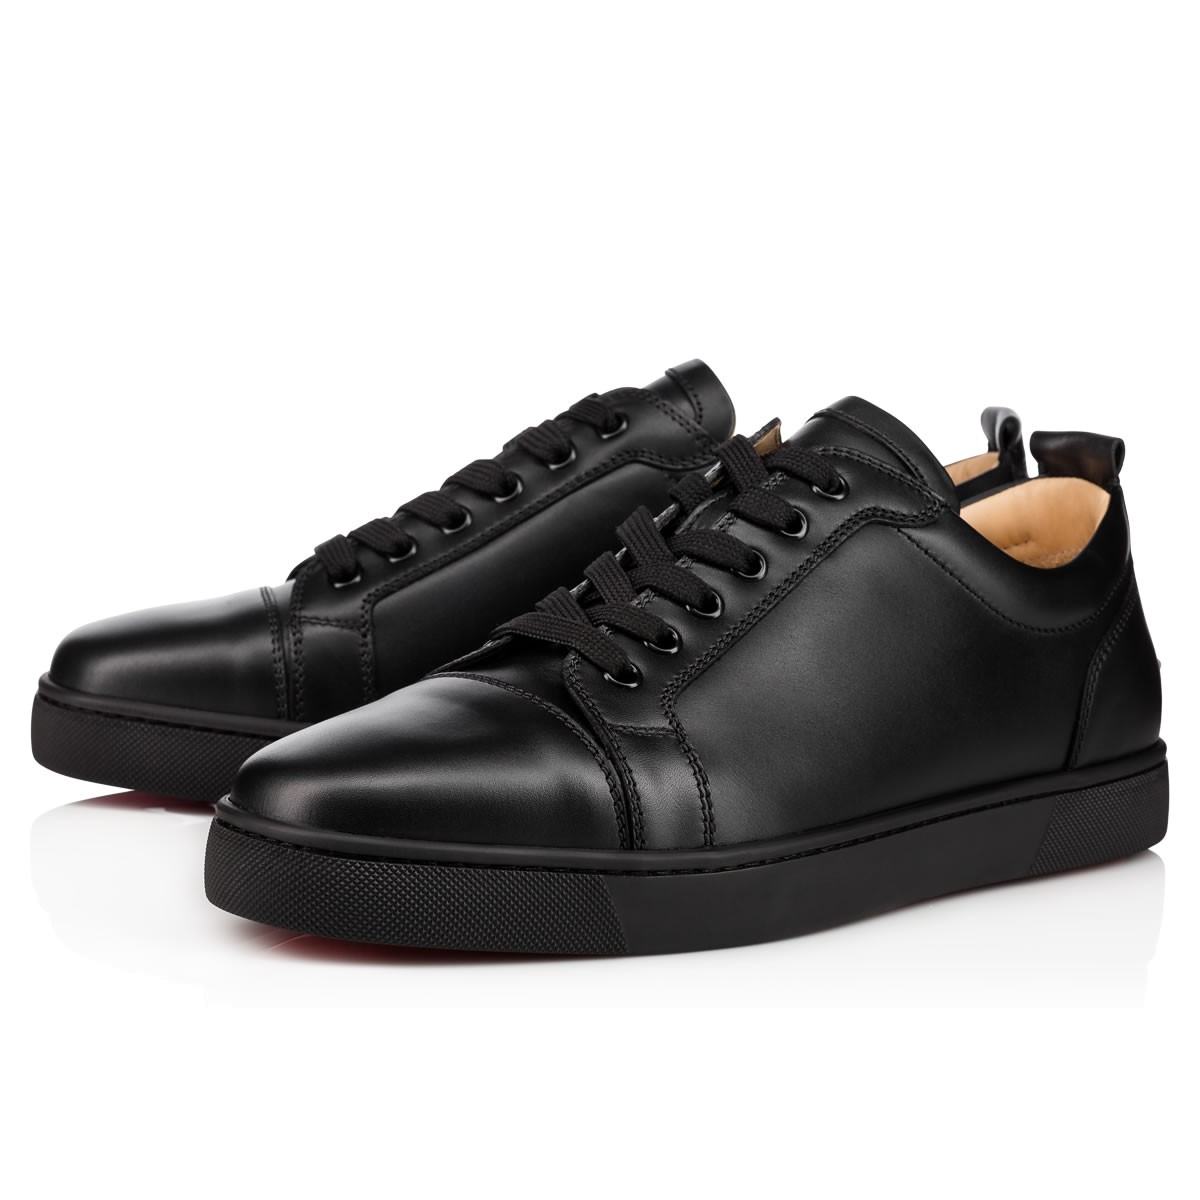 louboutin homme prix chaussure